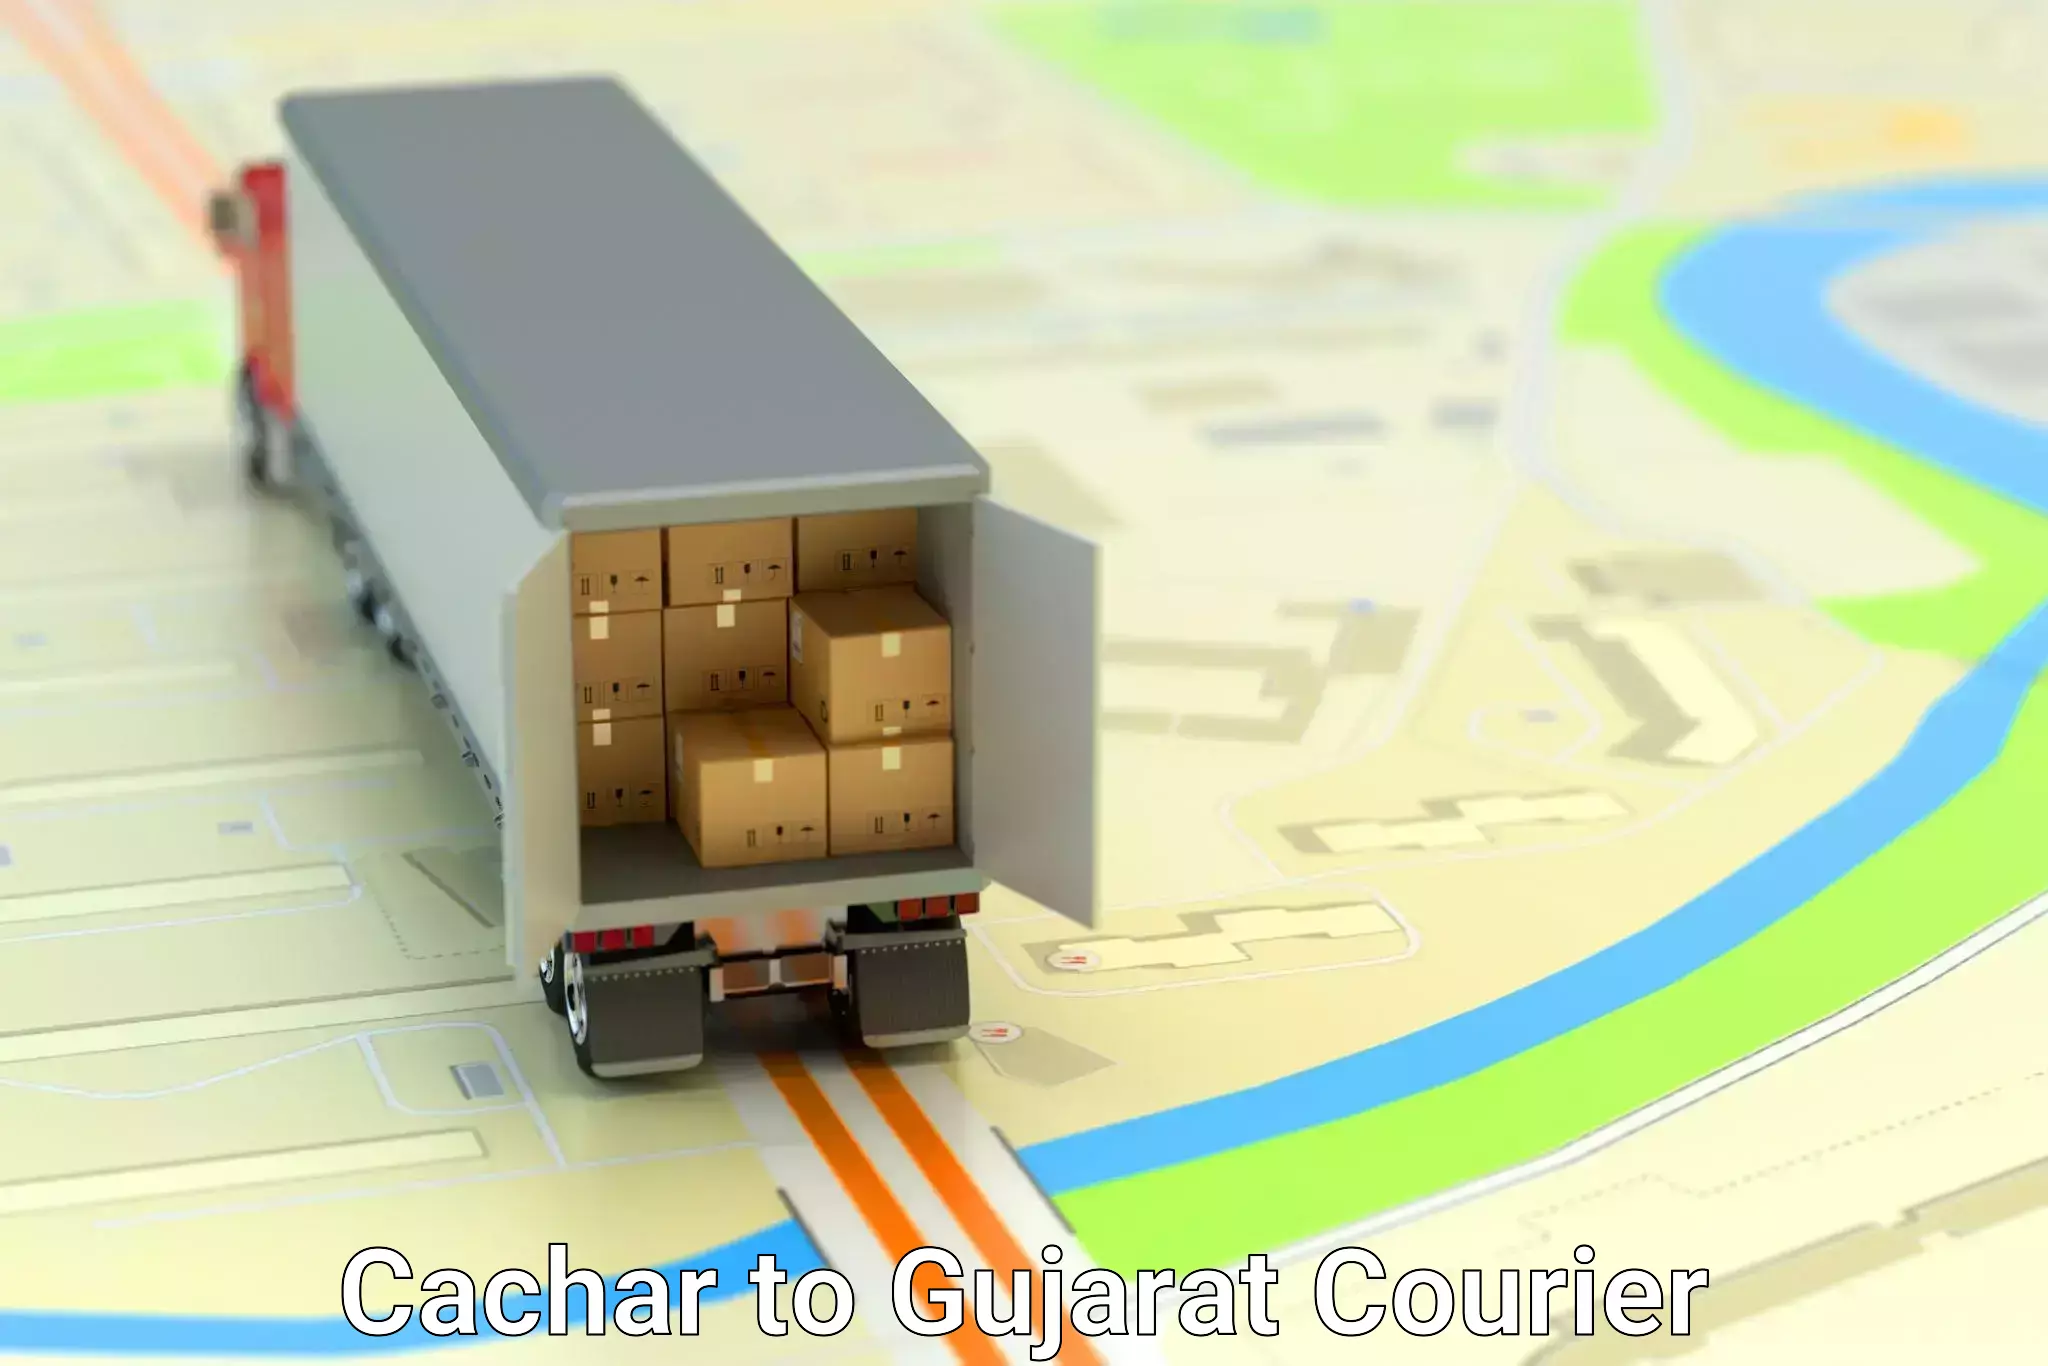 Personalized courier experiences Cachar to Gujarat